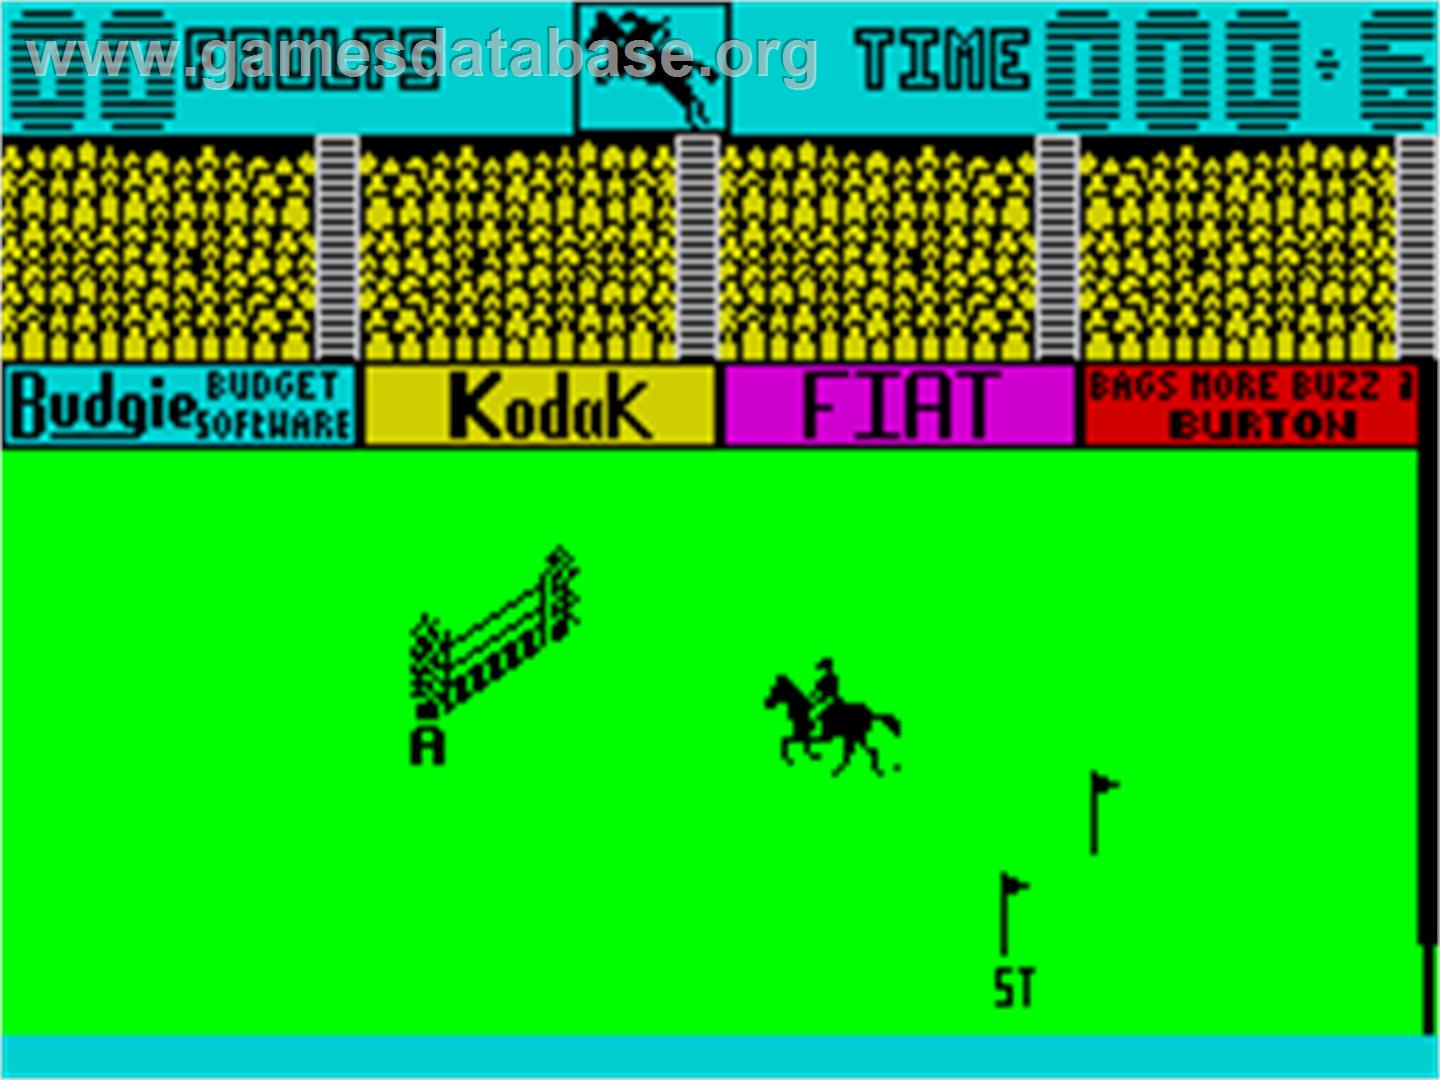 Show Jumping - Sinclair ZX Spectrum - Artwork - In Game